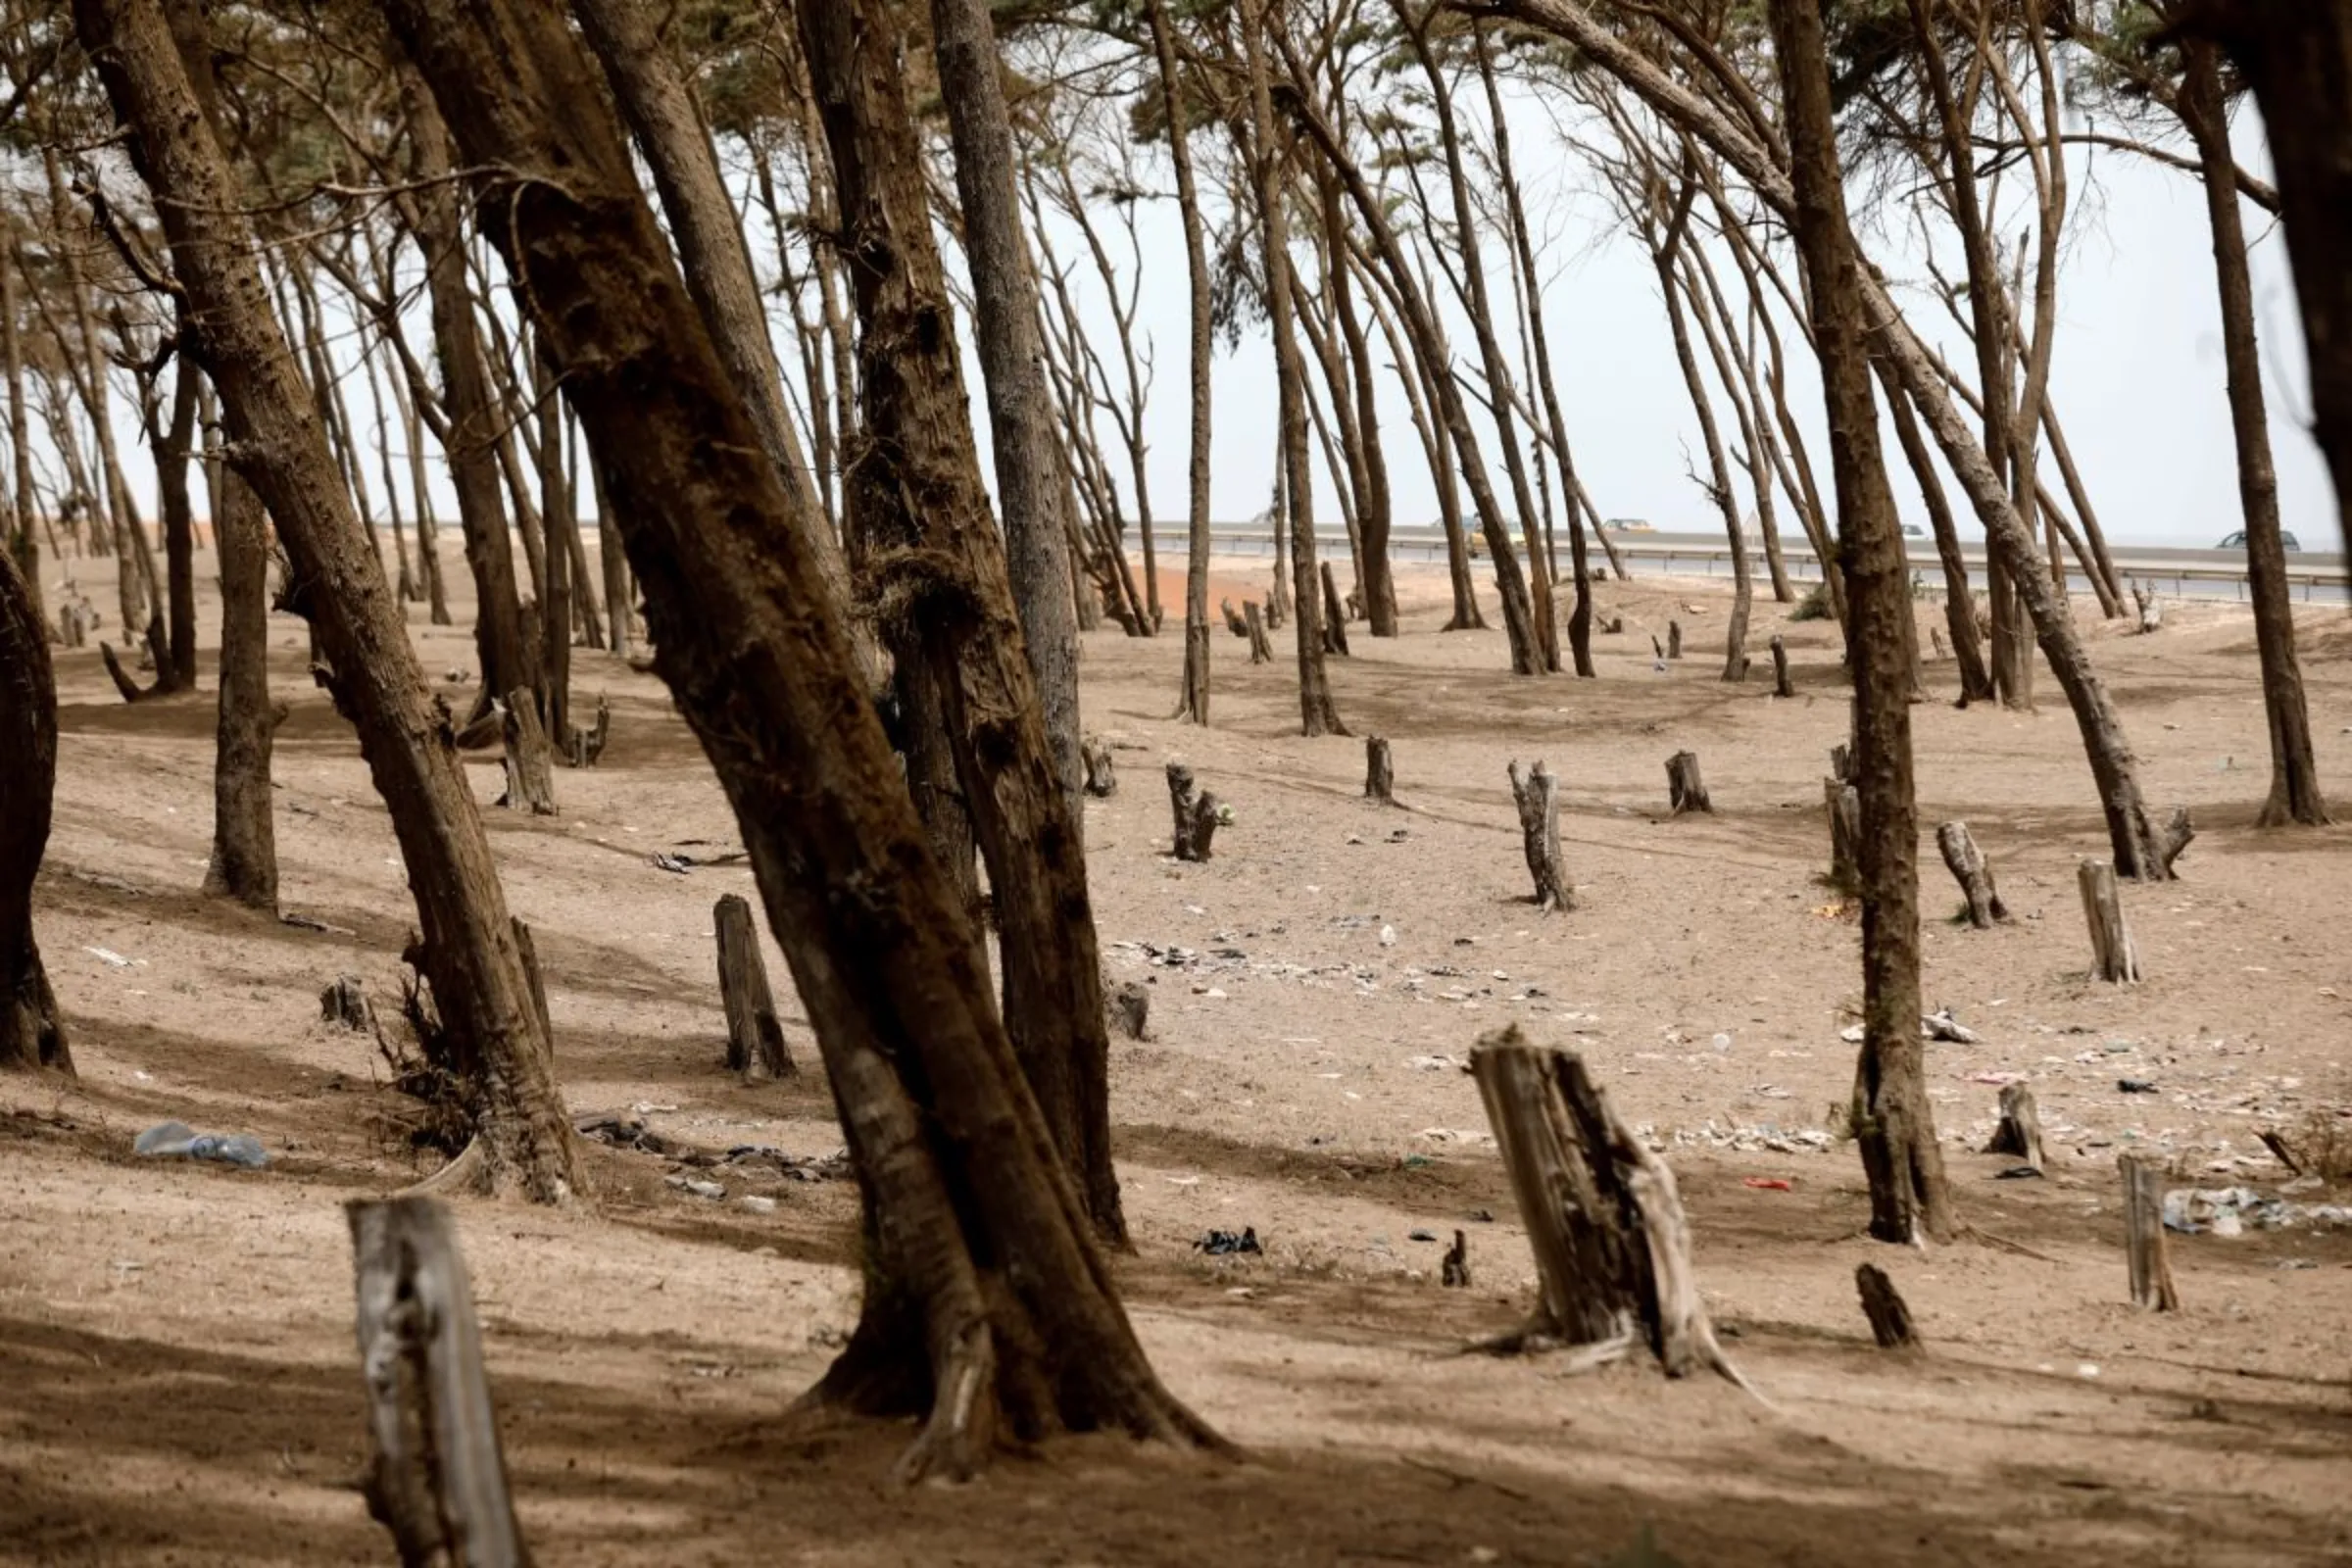 Remains of cut down trees are pictured next to the coast of Guediawaye on the outskirts of Dakar, Senegal June 21, 2020. REUTERS/Zohra Bensemra